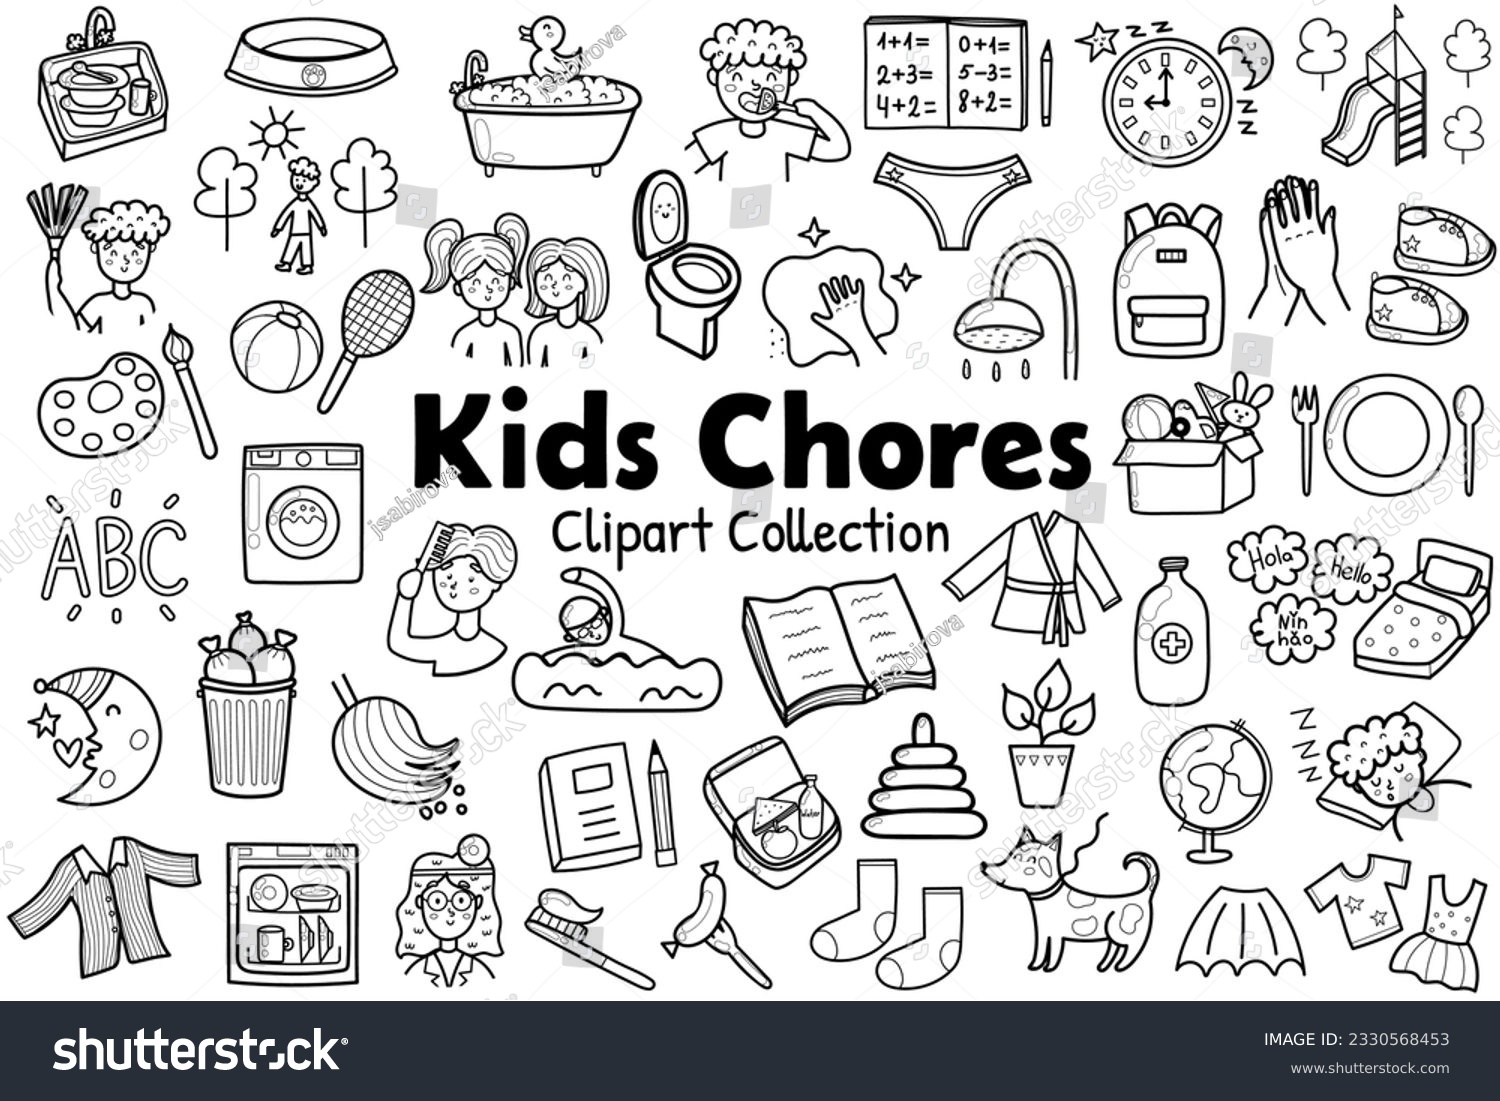 SVG of Kids chores clipart collection in outline. Black and white daily routine icons set. Tasks stickers for creating reward chart. Vector illustration svg